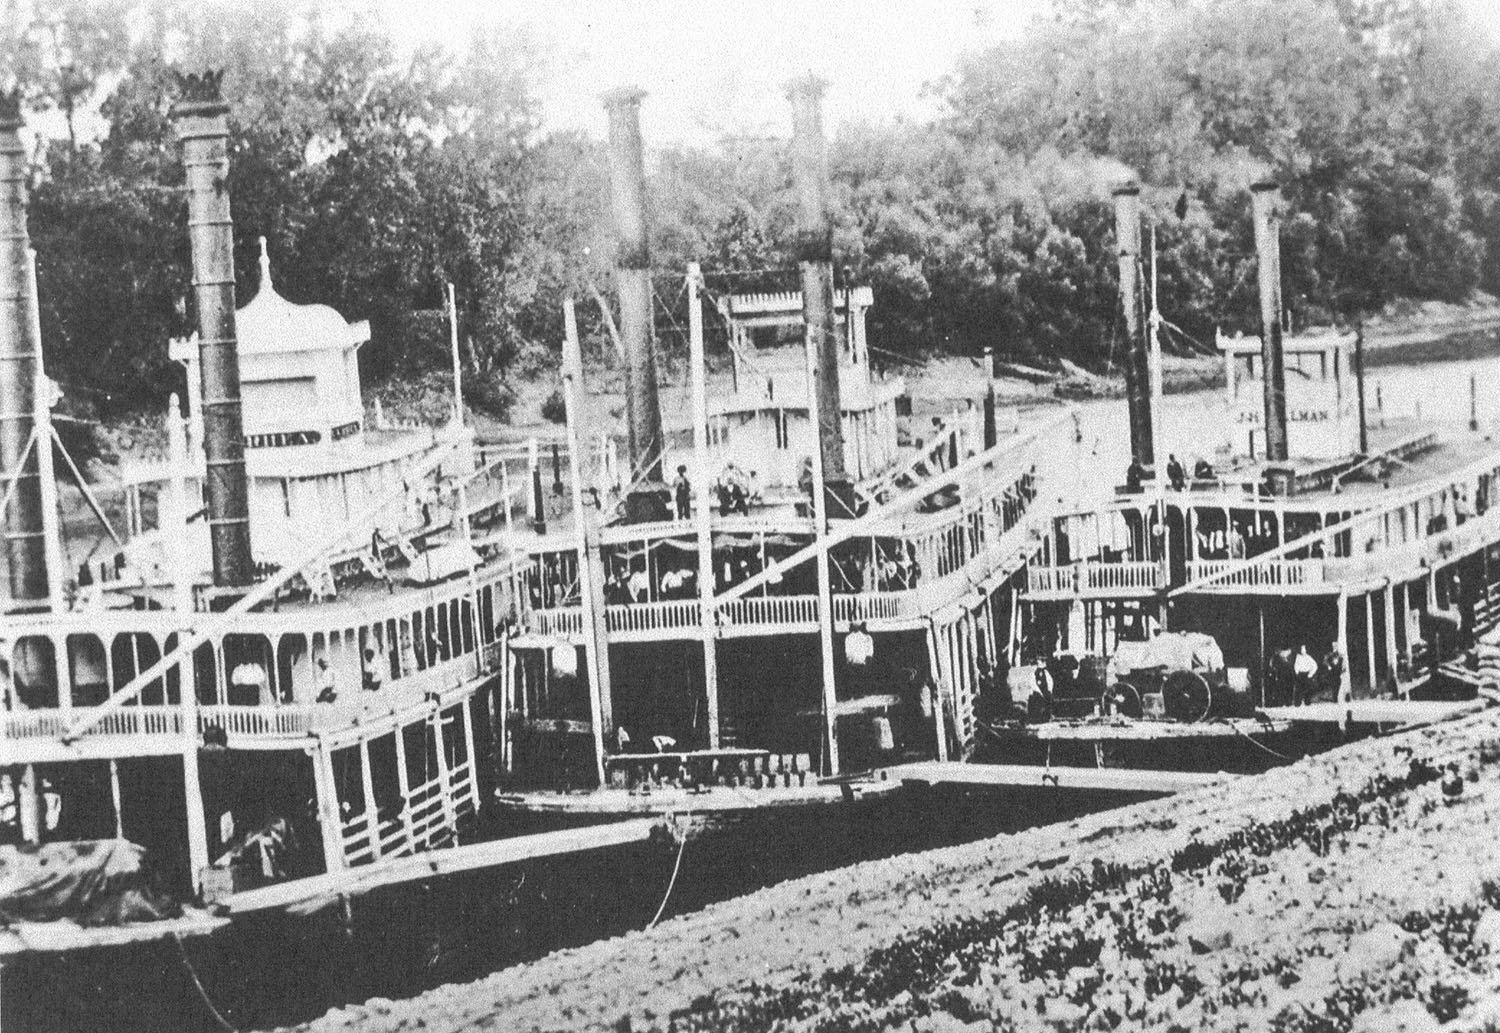 A trio of packet boats at Clarksville, Tenn., in the 1880s. (Keith Norrington collection)